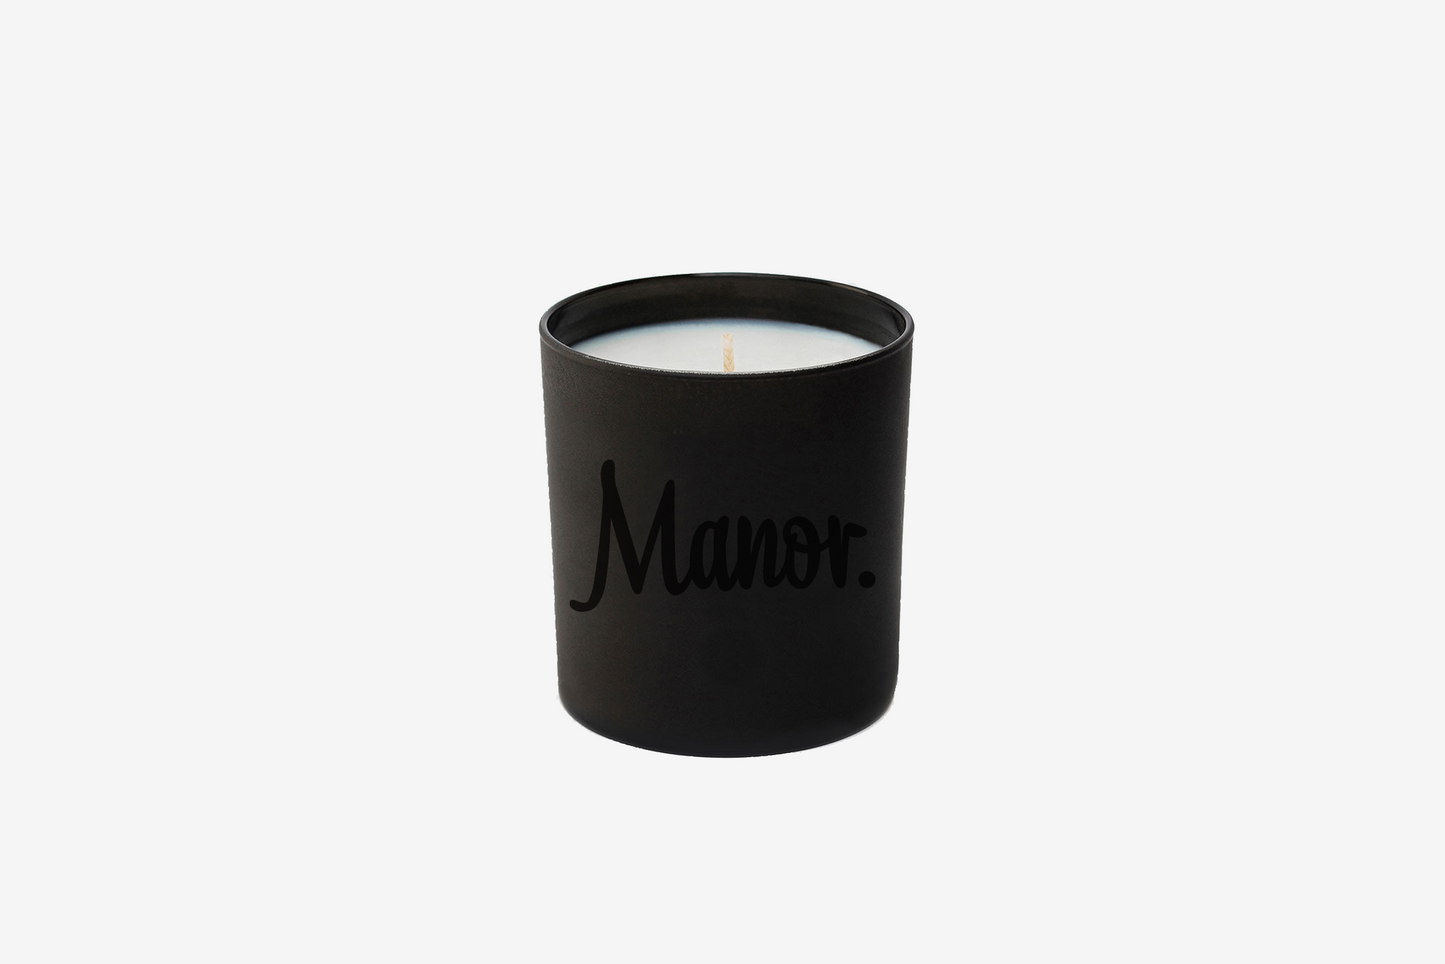 Manor "Candle" - Sugared Chestnut